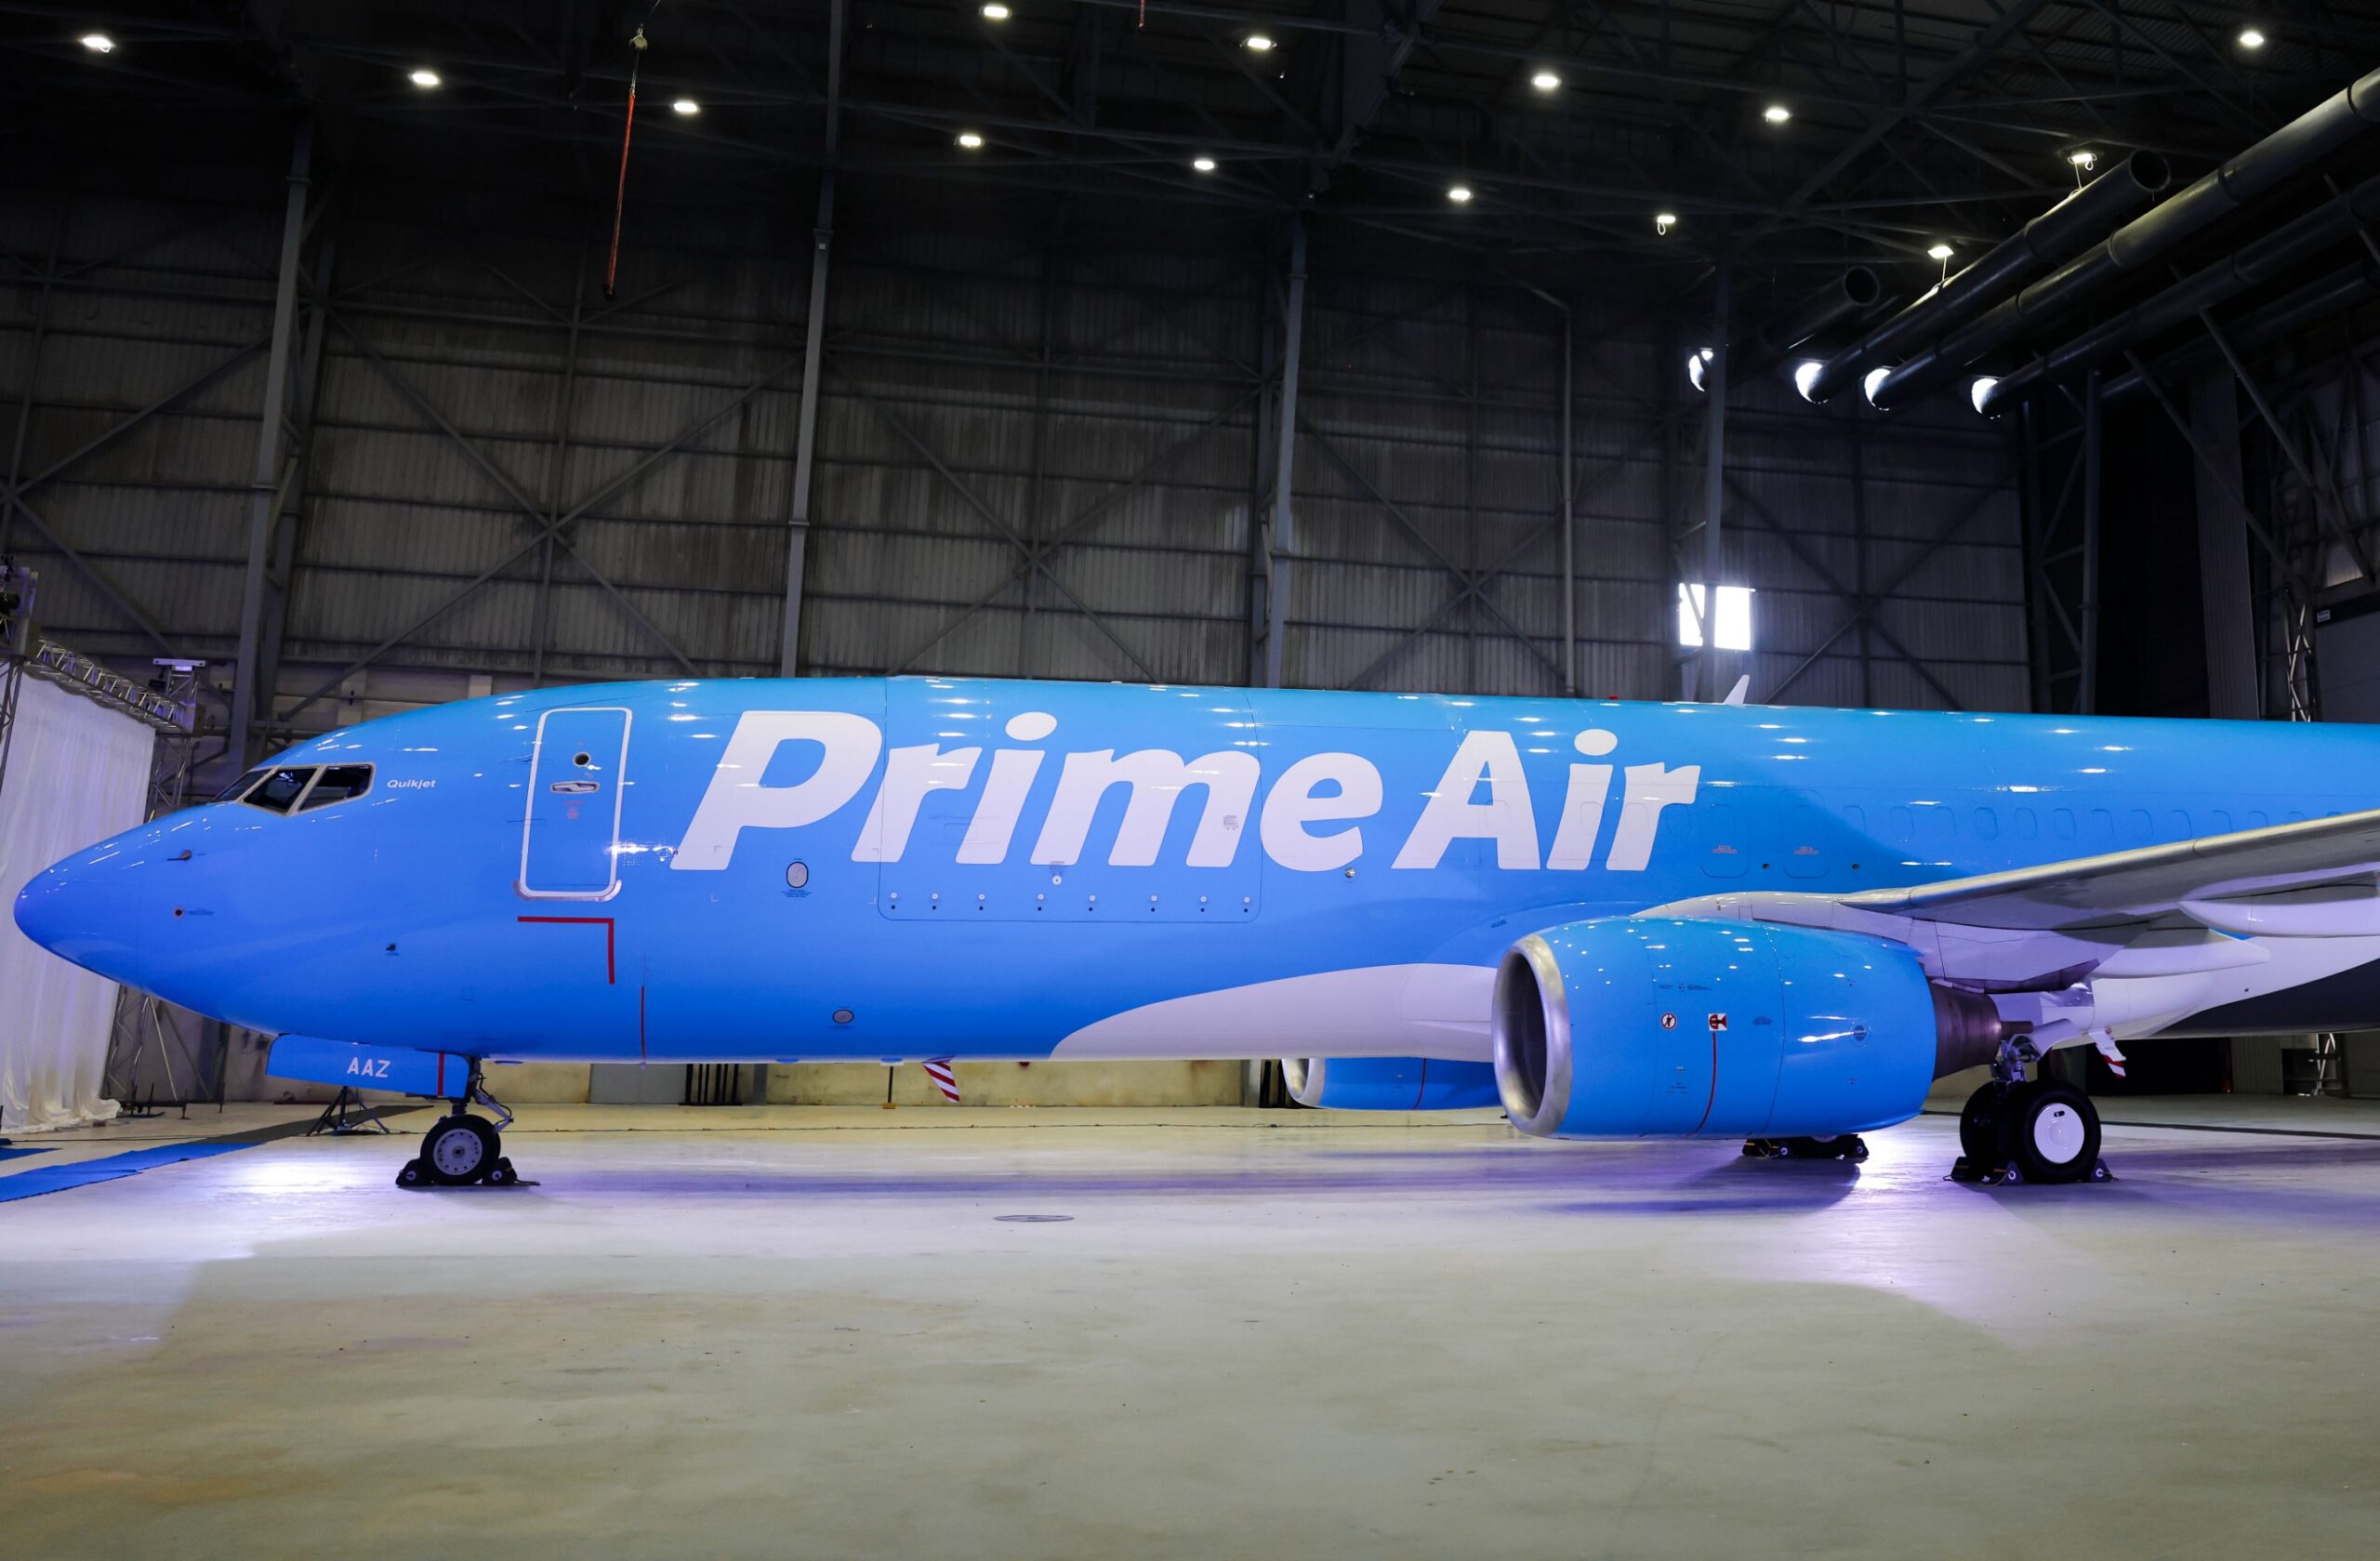 Amazon Air launches in India